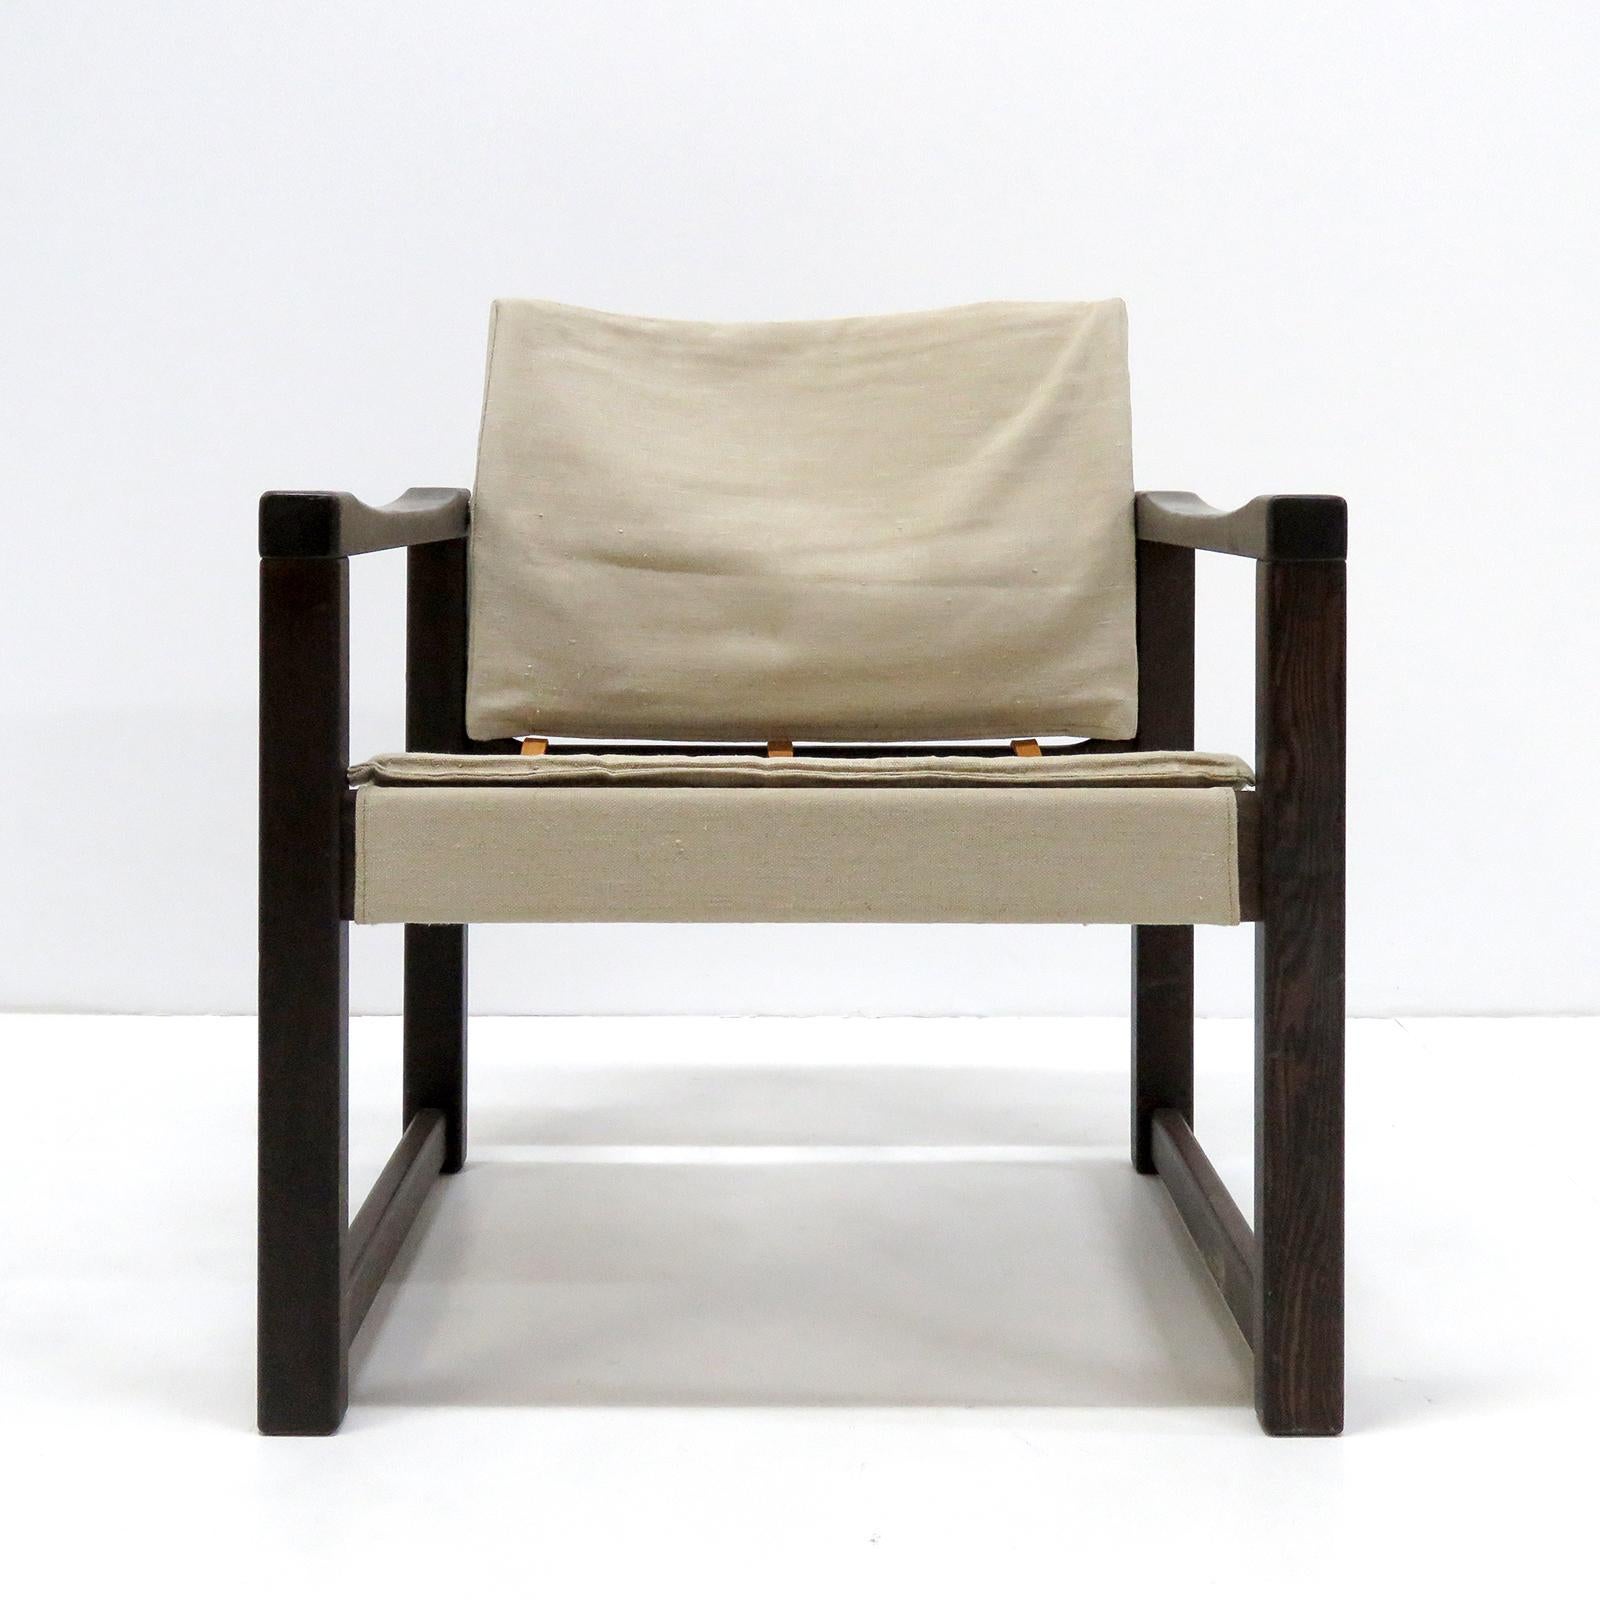 Wonderful, compact Danish modern safari chairs by Karin Mobring, Sweden, designed in 1970, blackened pine frame with linen upholstery including a loose seat cushion.